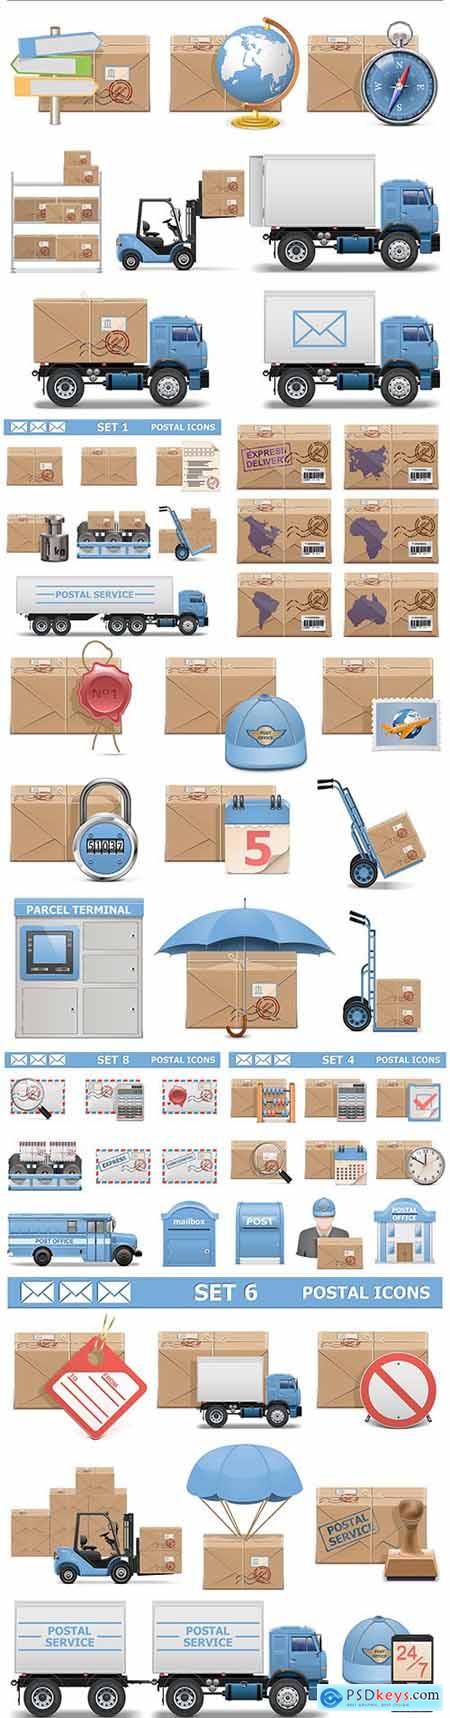 Mail icons and logistics delivery realistic design set